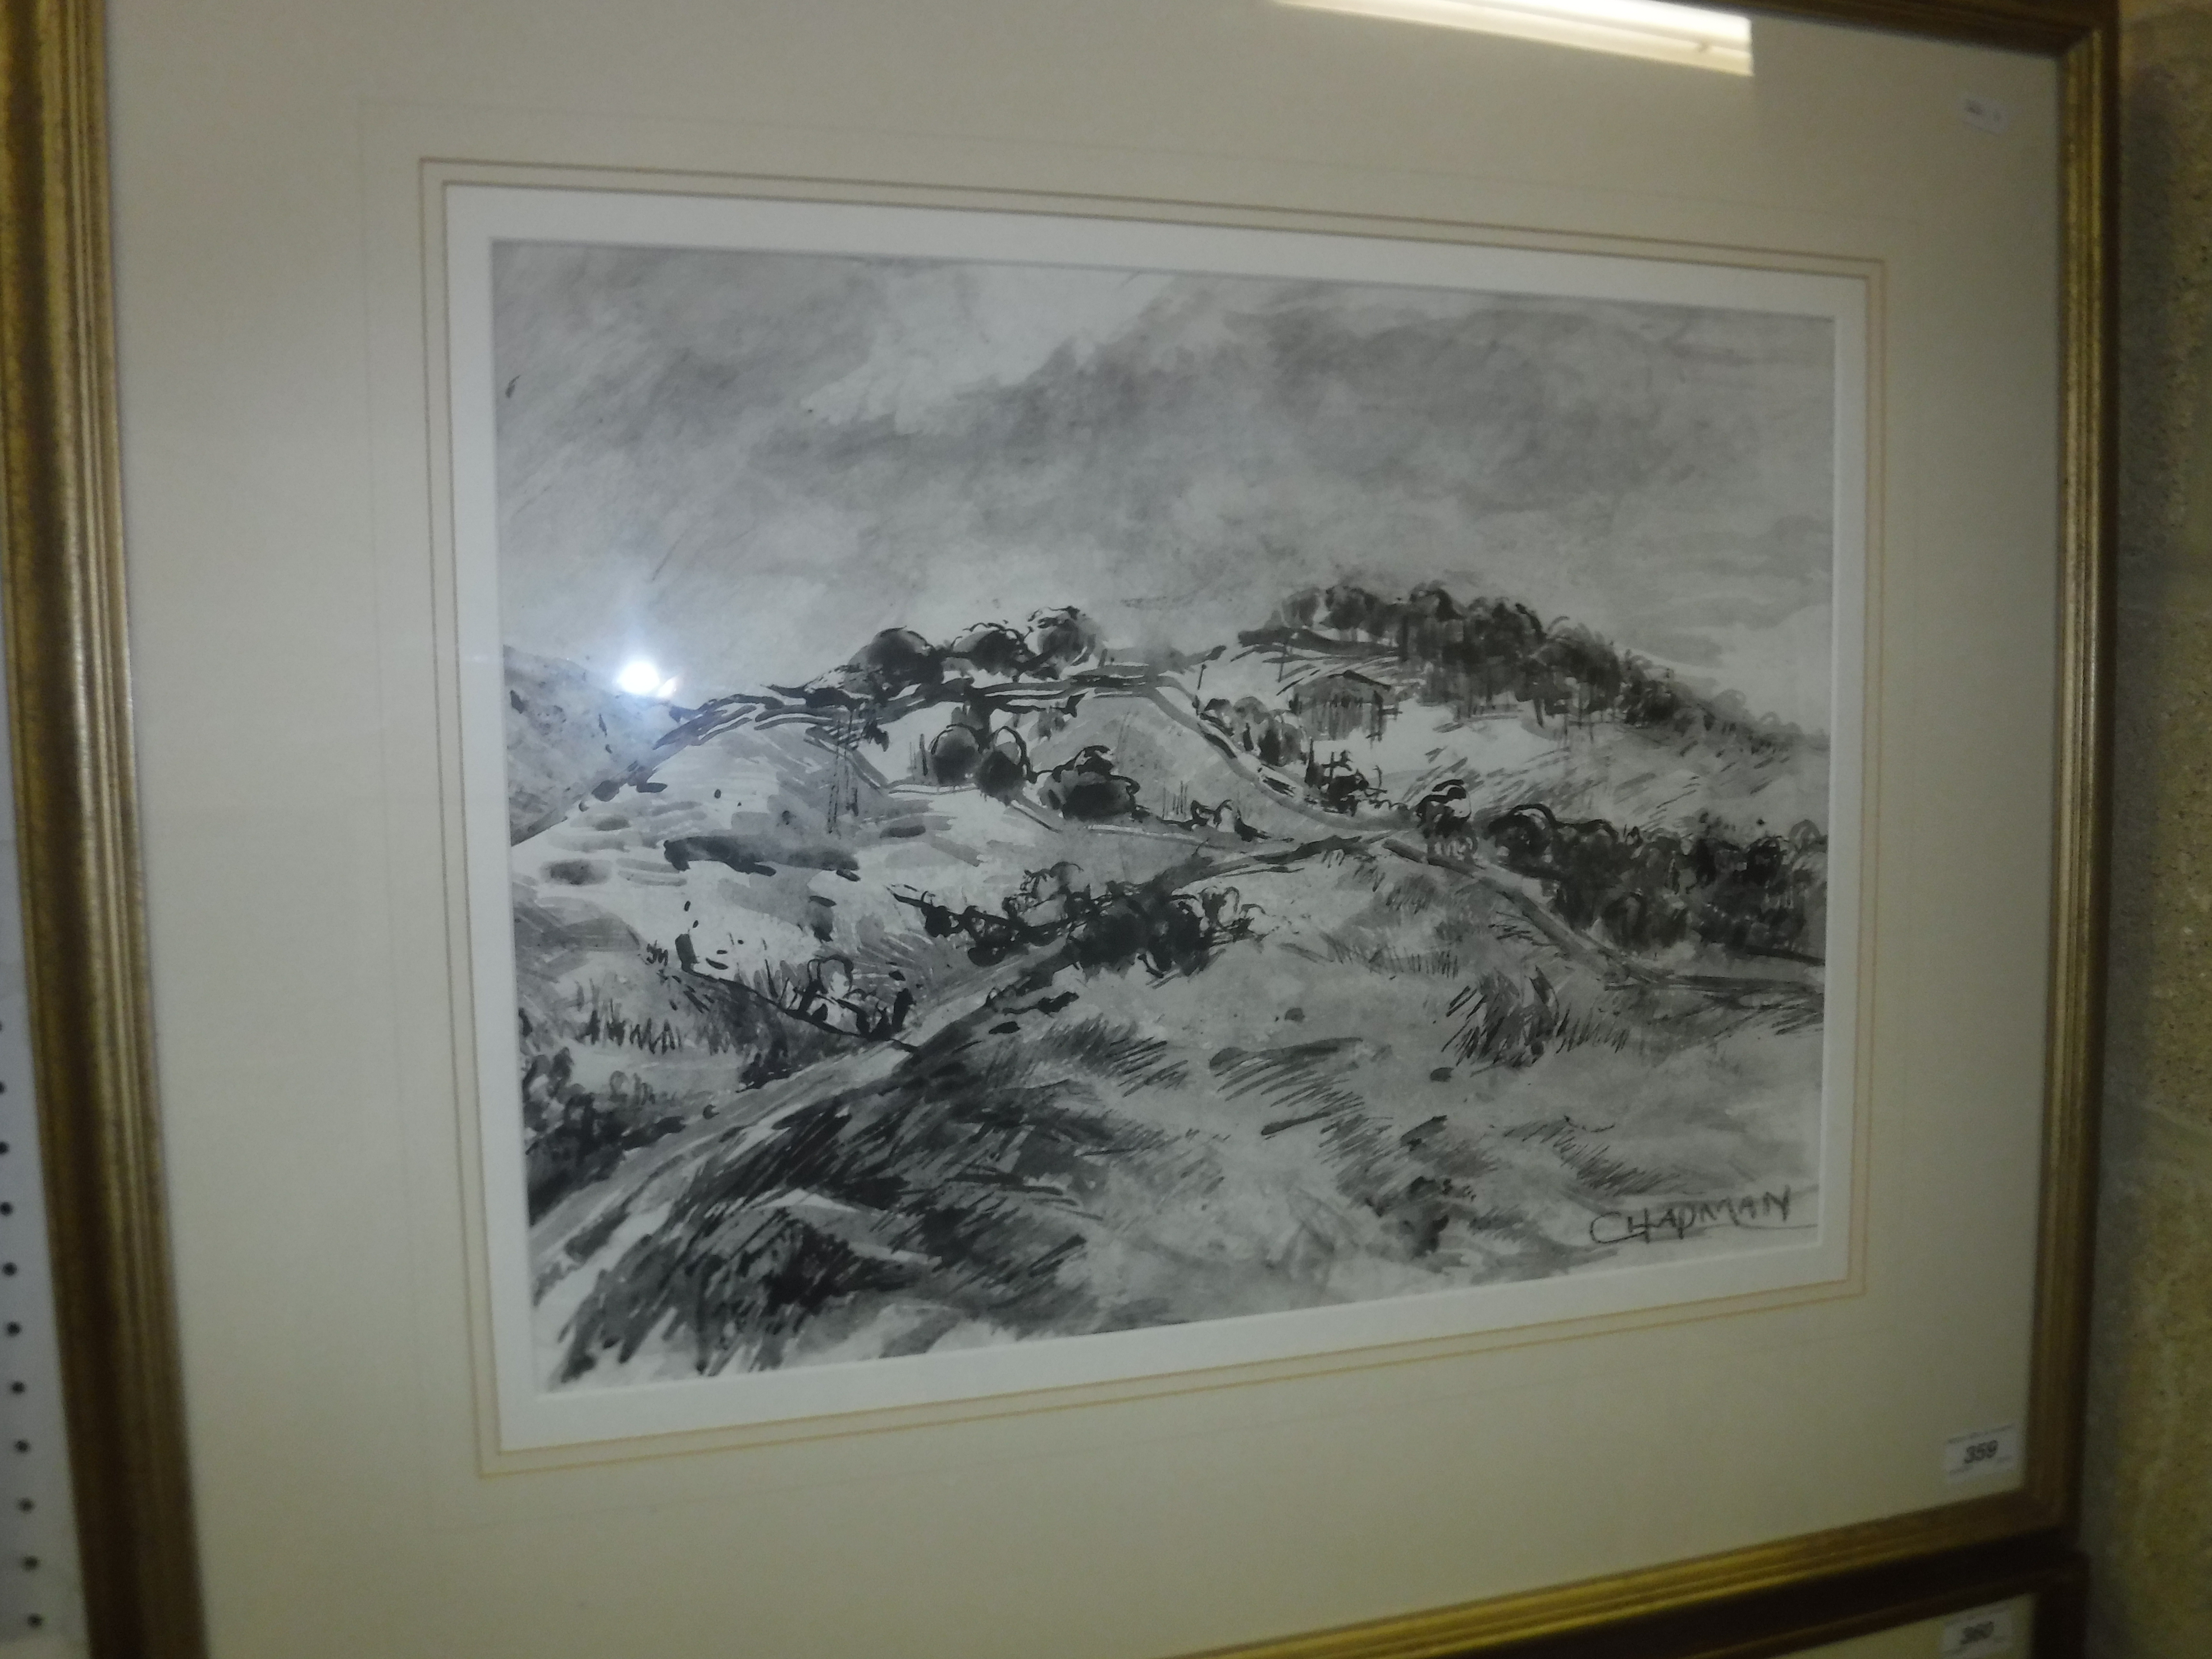 CHAPMAN "Hillside view", landscape study, pen and ink, signed lower right, size including frame